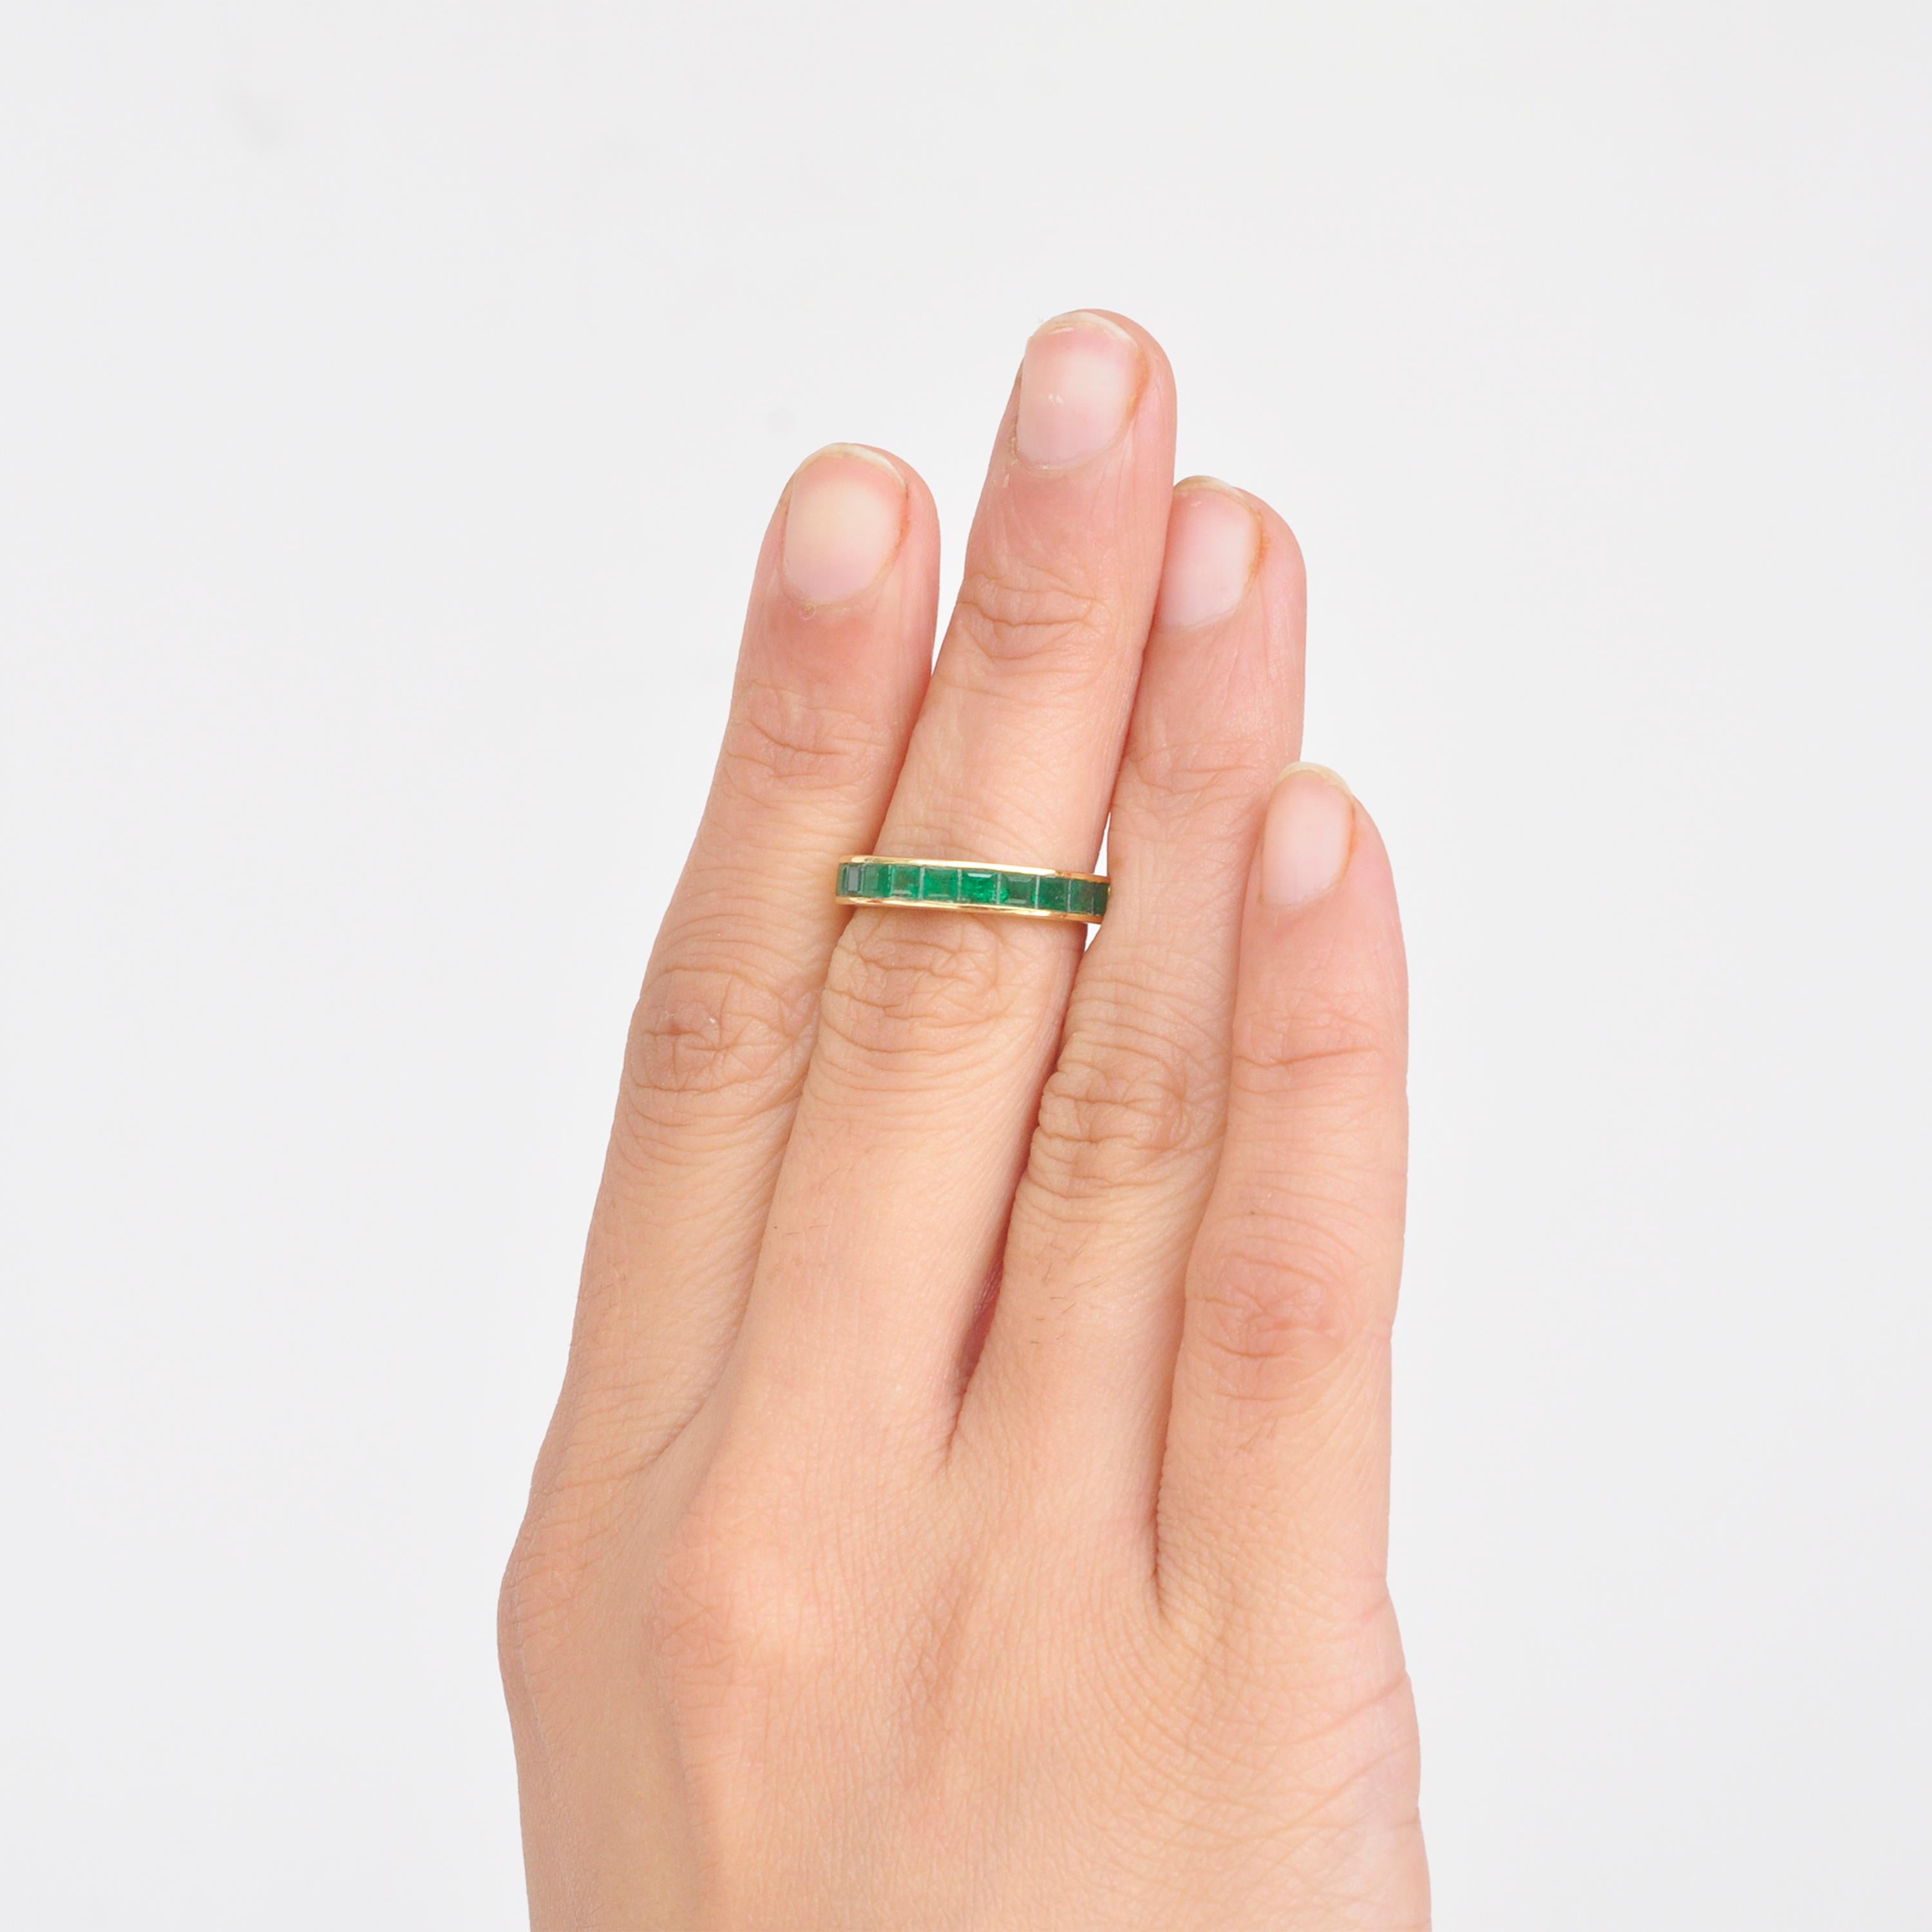 18 karat gold channel set zambian emeralds square band ring.

A classic 18 karat gold contemporary band has channel set zambian emerald baguettes. The natural emerald  baguettes used are lustrous and the quality is excellent. This ring is a treat